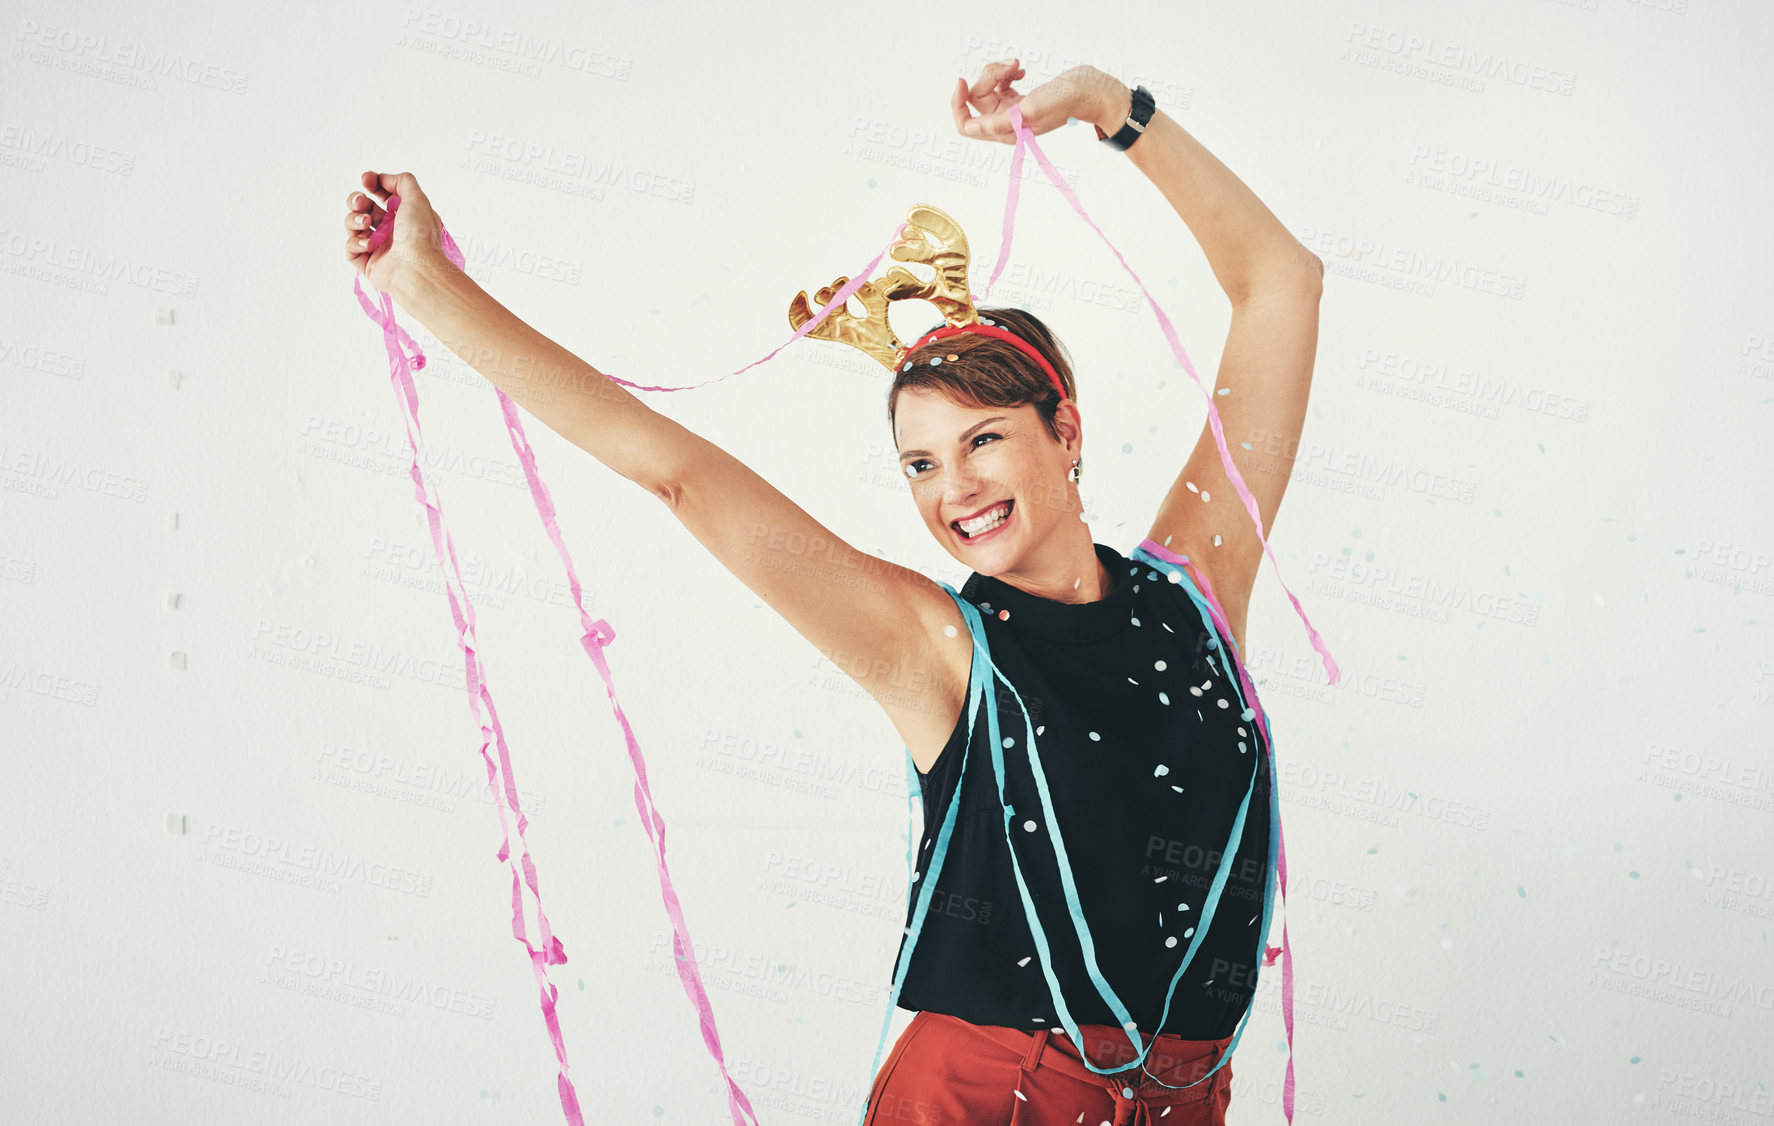 Buy stock photo Shot of an attractive and cheerful young woman celebrating with confetti falling around her against a grey background